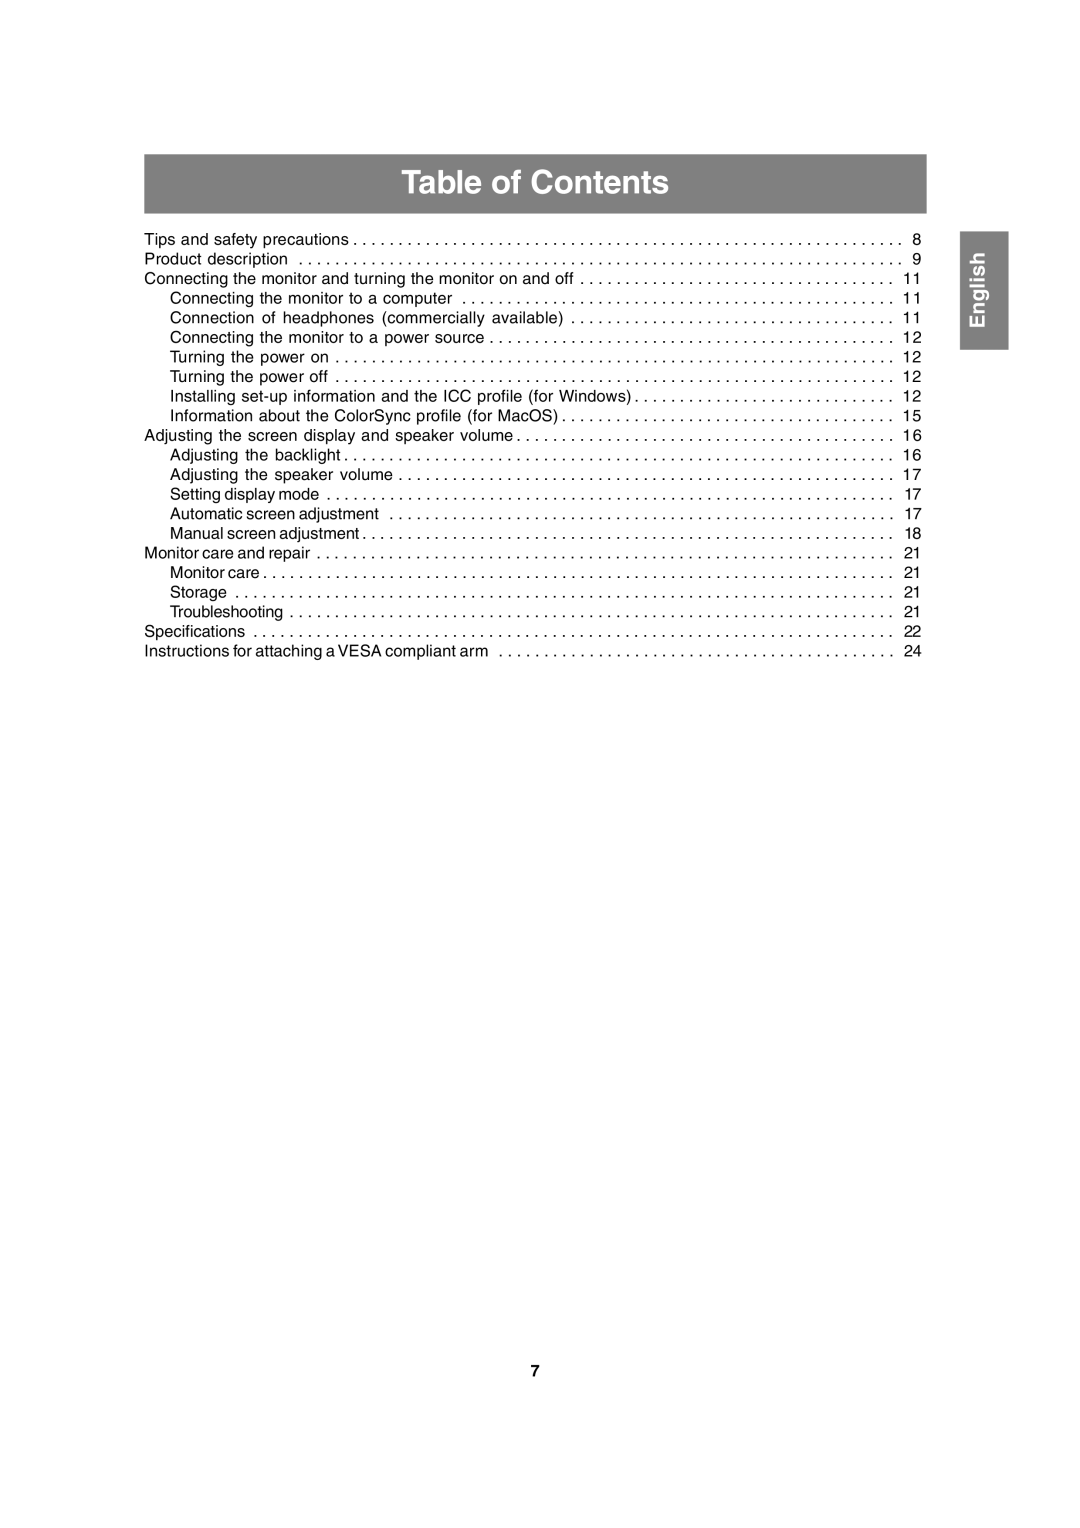 Sharp LL-T15A4 operation manual Table of Contents, English 